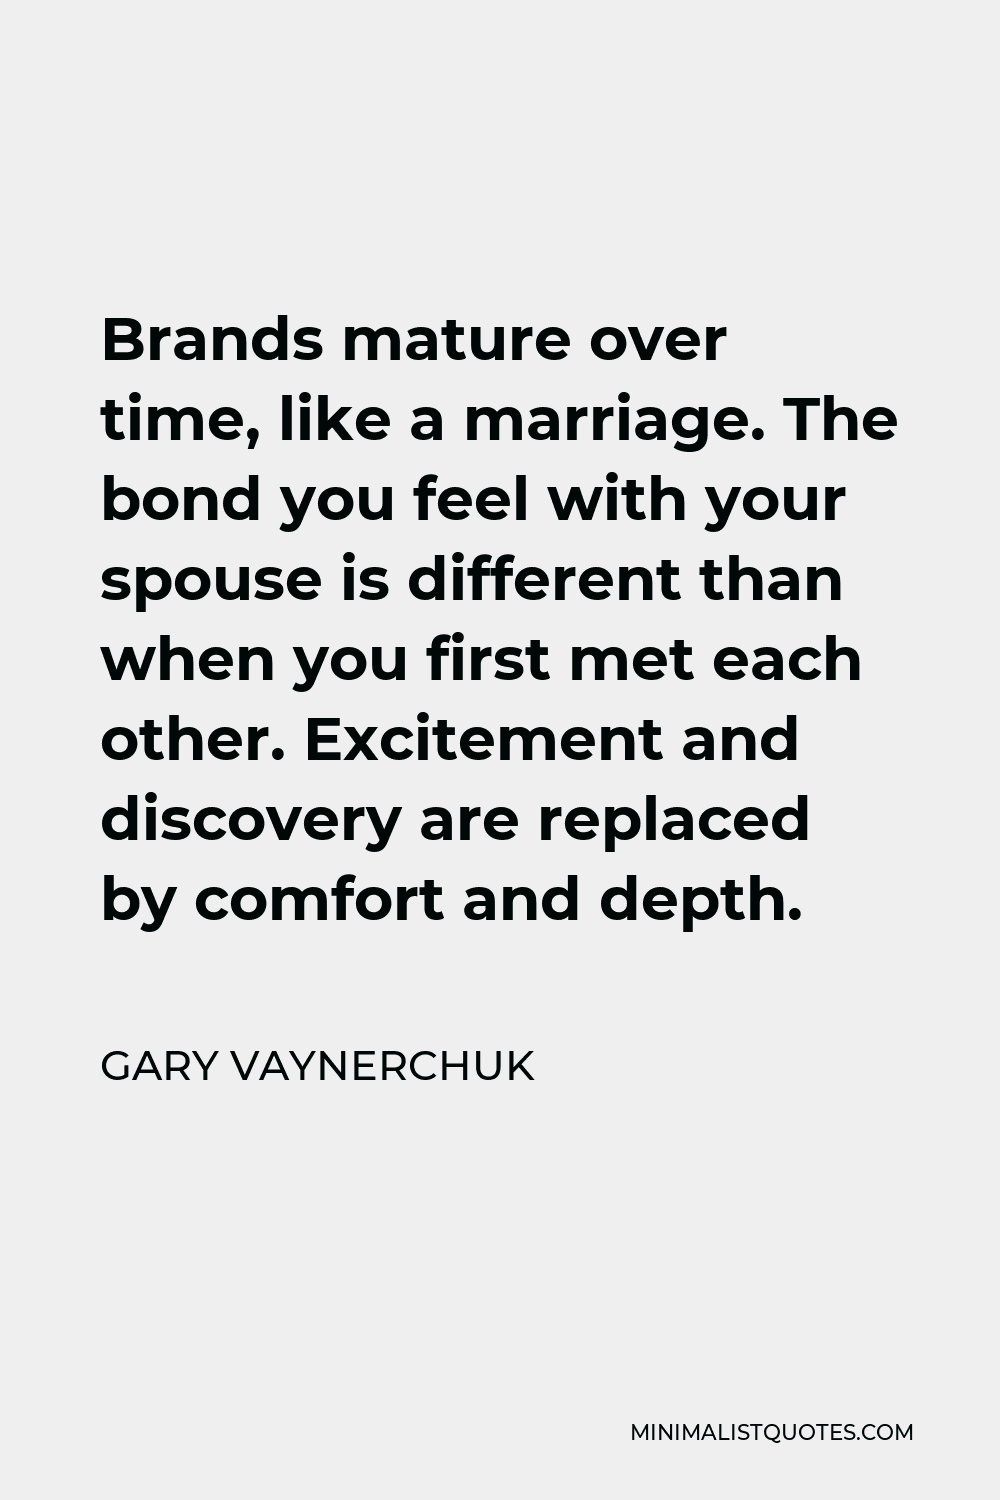 Gary Vaynerchuk Quote - Brands mature over time, like a marriage. The bond you feel with your spouse is different than when you first met each other. Excitement and discovery are replaced by comfort and depth.